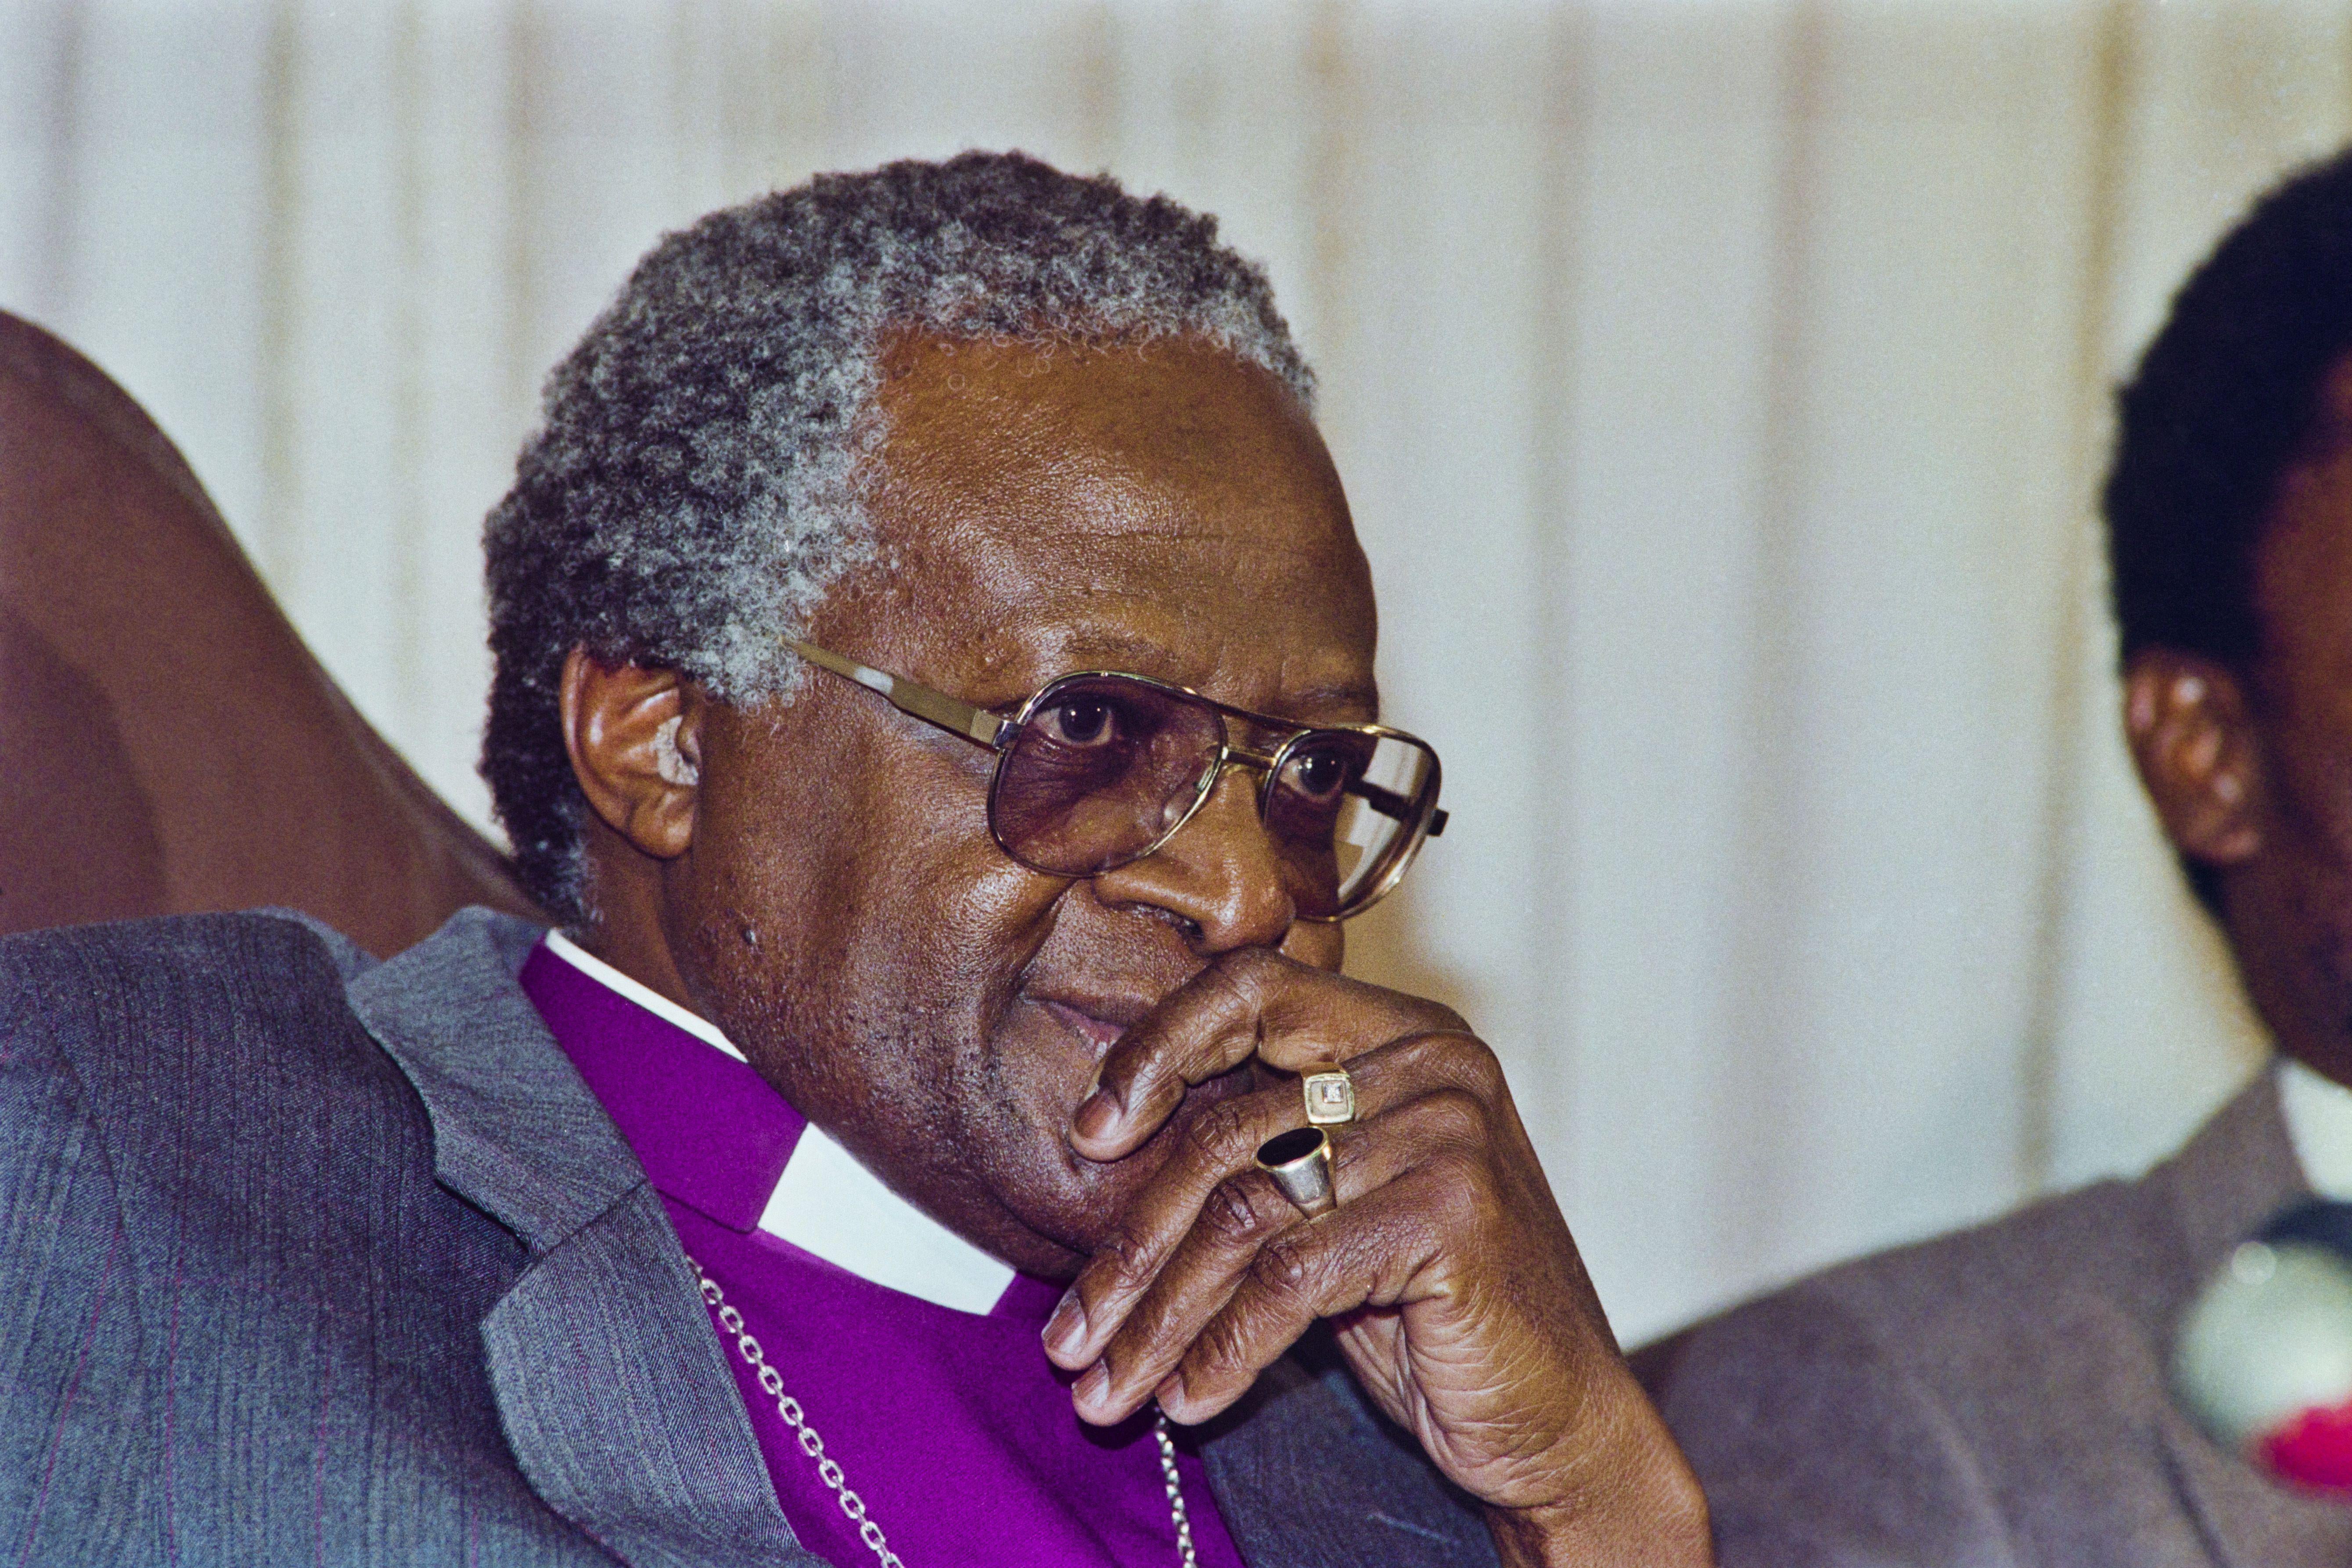 South African activist and Nobel Peace Prize and Anglican Archbishop Desmond Tutu gives a news conference, on September 9, 1988, in Johannesburg.